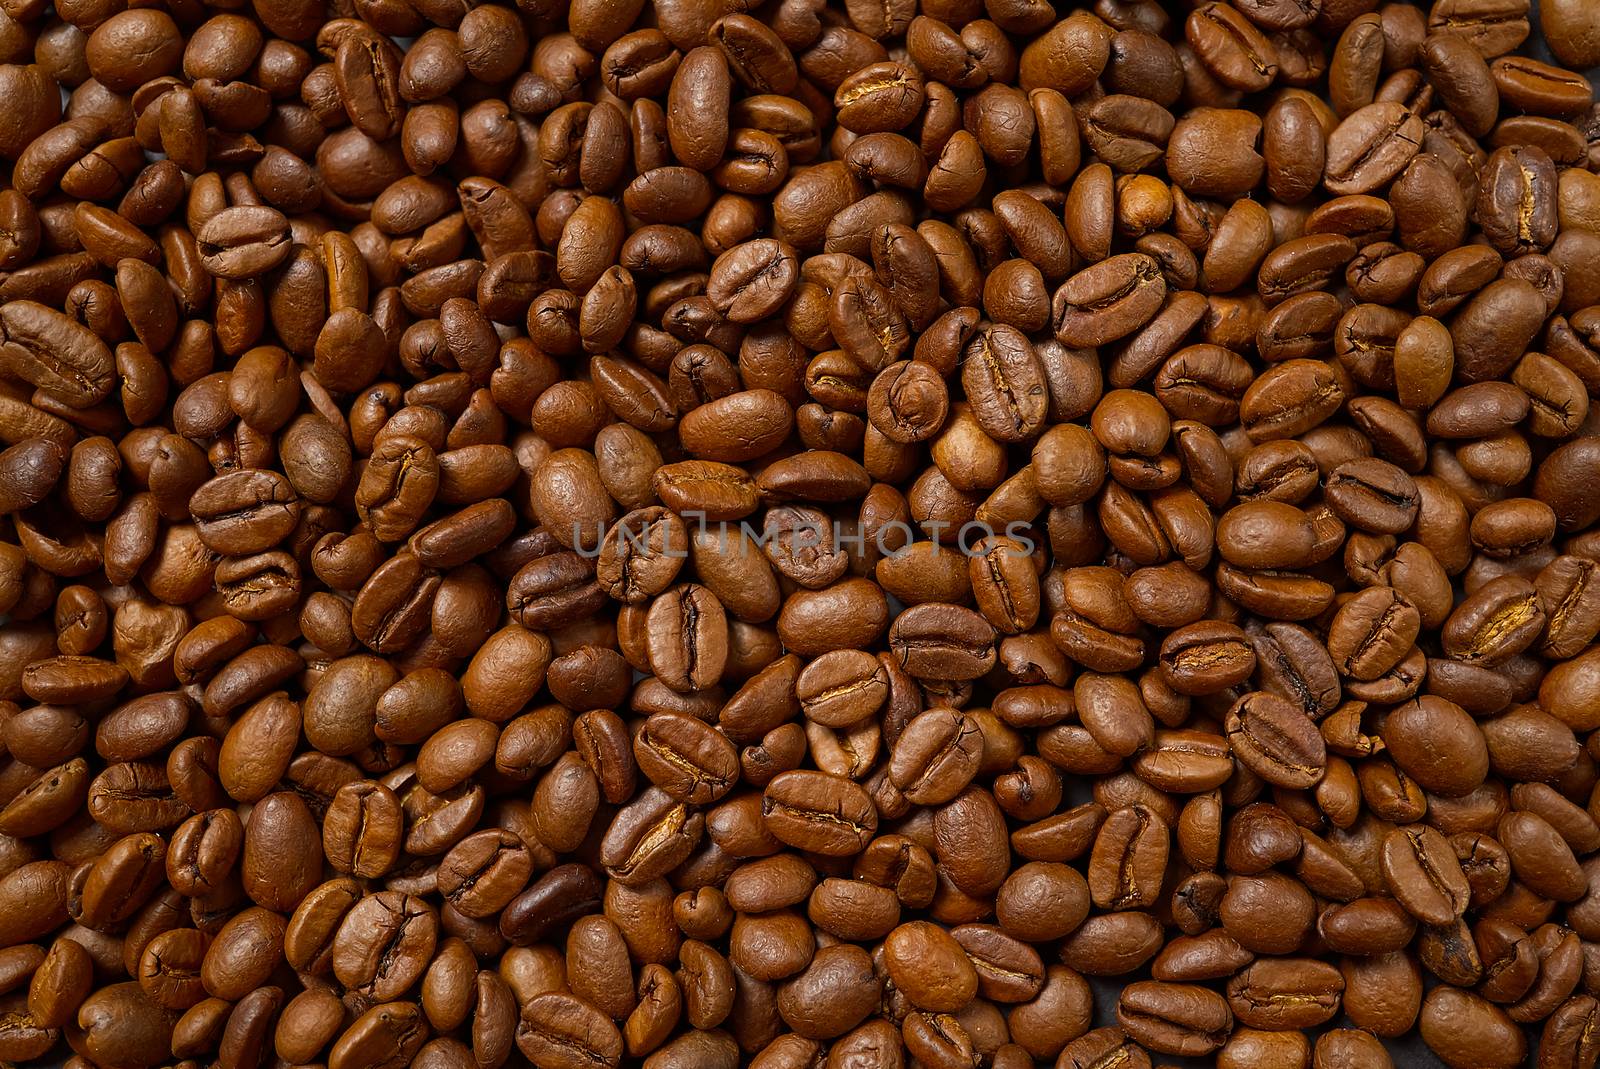 Texture of coffee beans. Roasted coffee beans background. close up Coffee beans.